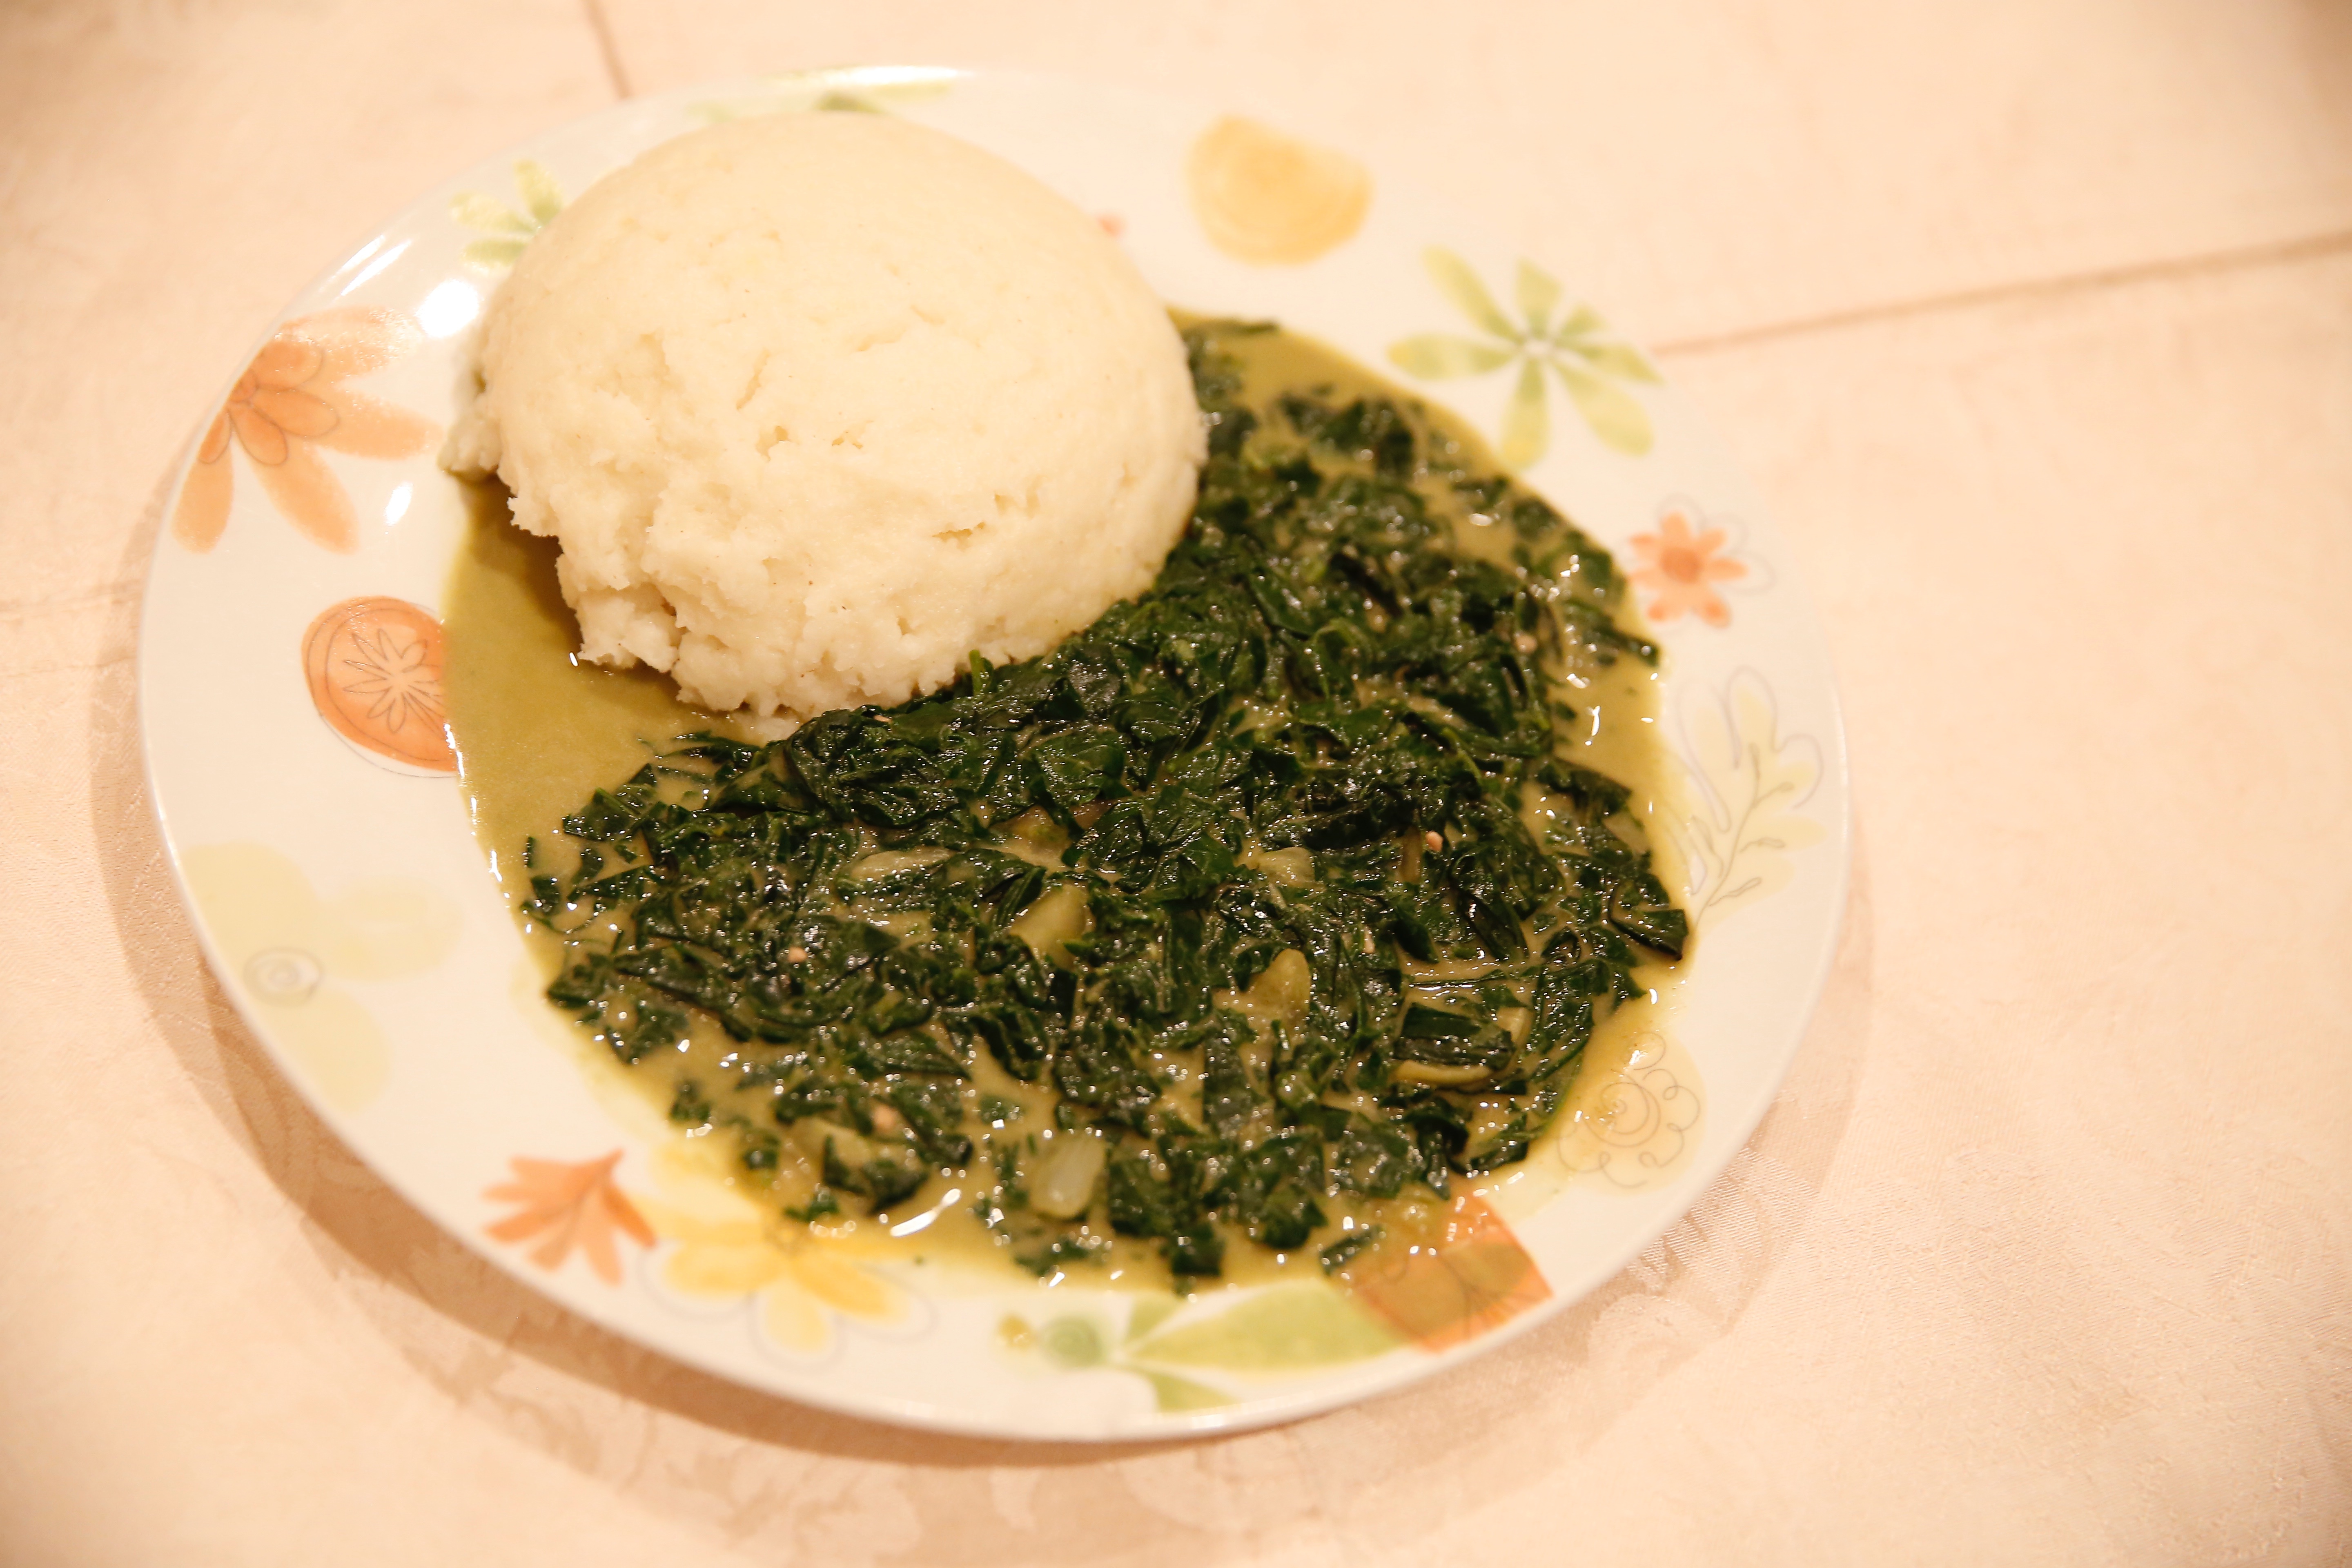 Nyete with peanut butter, served with Asida